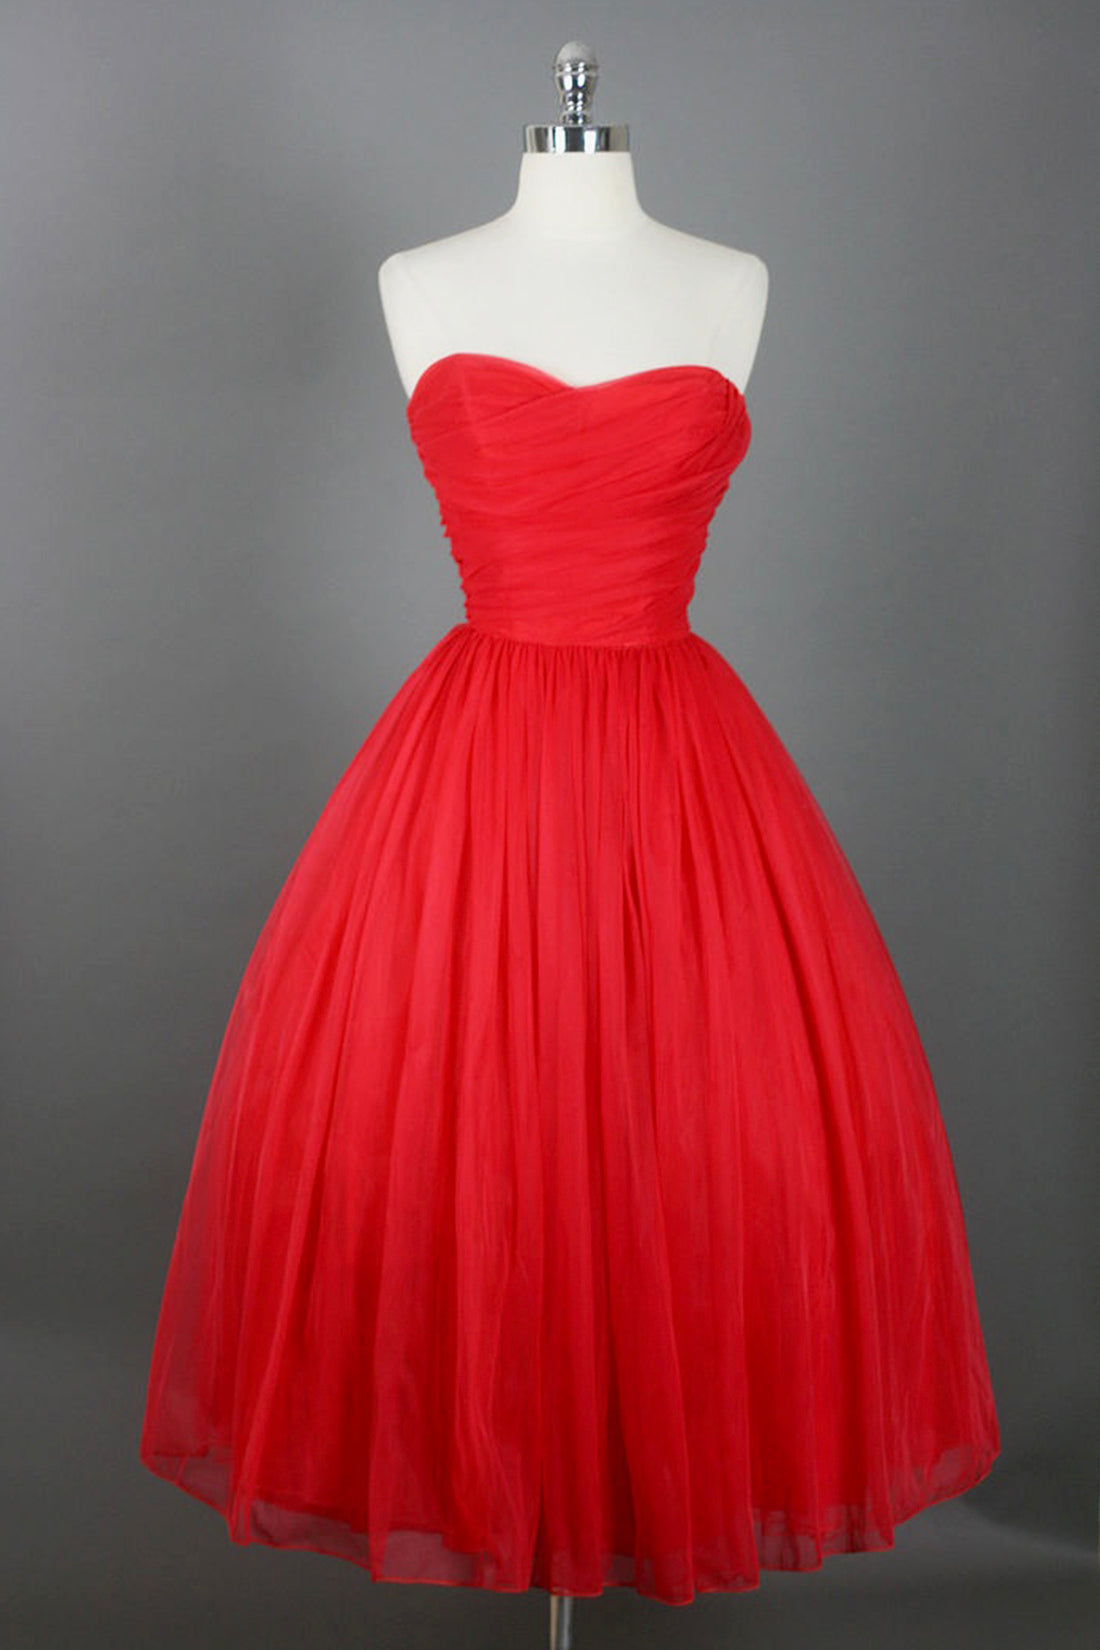 Red Strapless Tulle Short Prom Dress, Cute A-Line Sweetheart Neck Party Dress